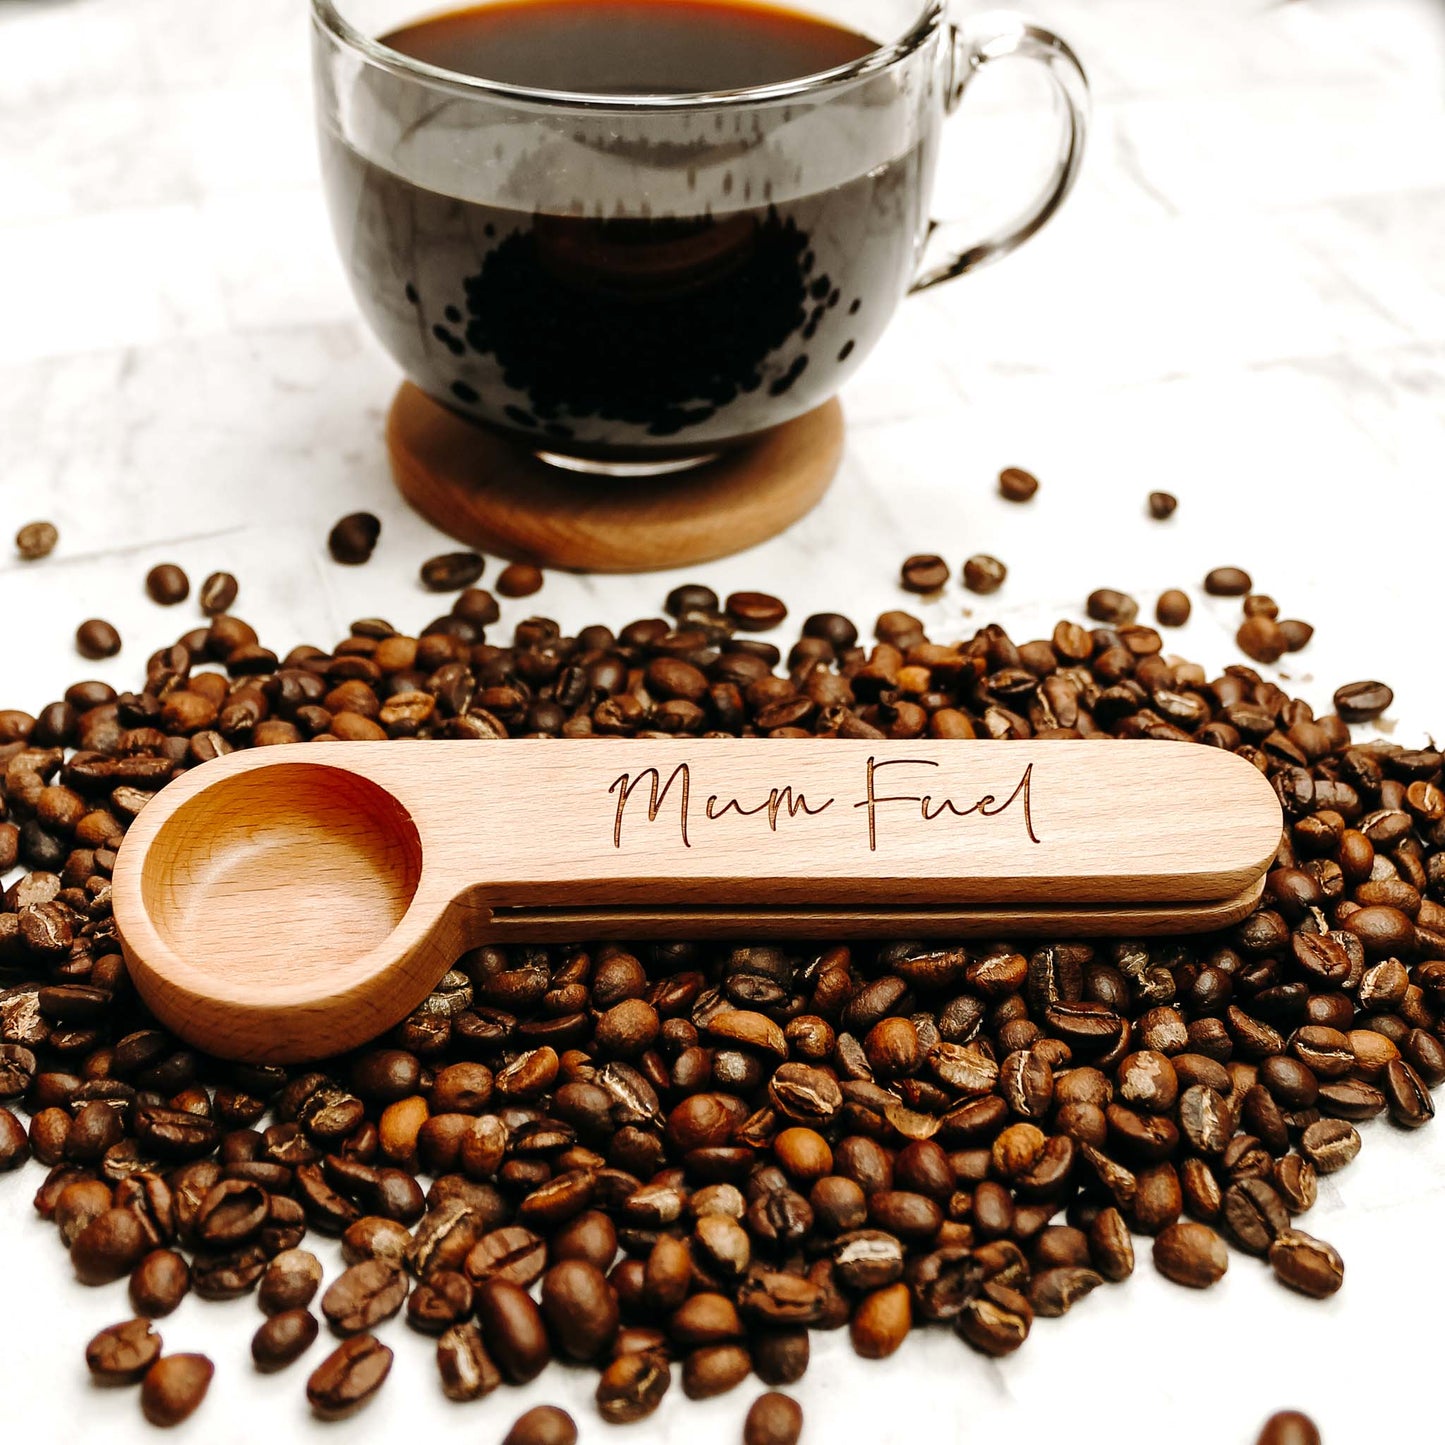 Mum fuel wooden engraved coffee spoon for the coffee loving mum